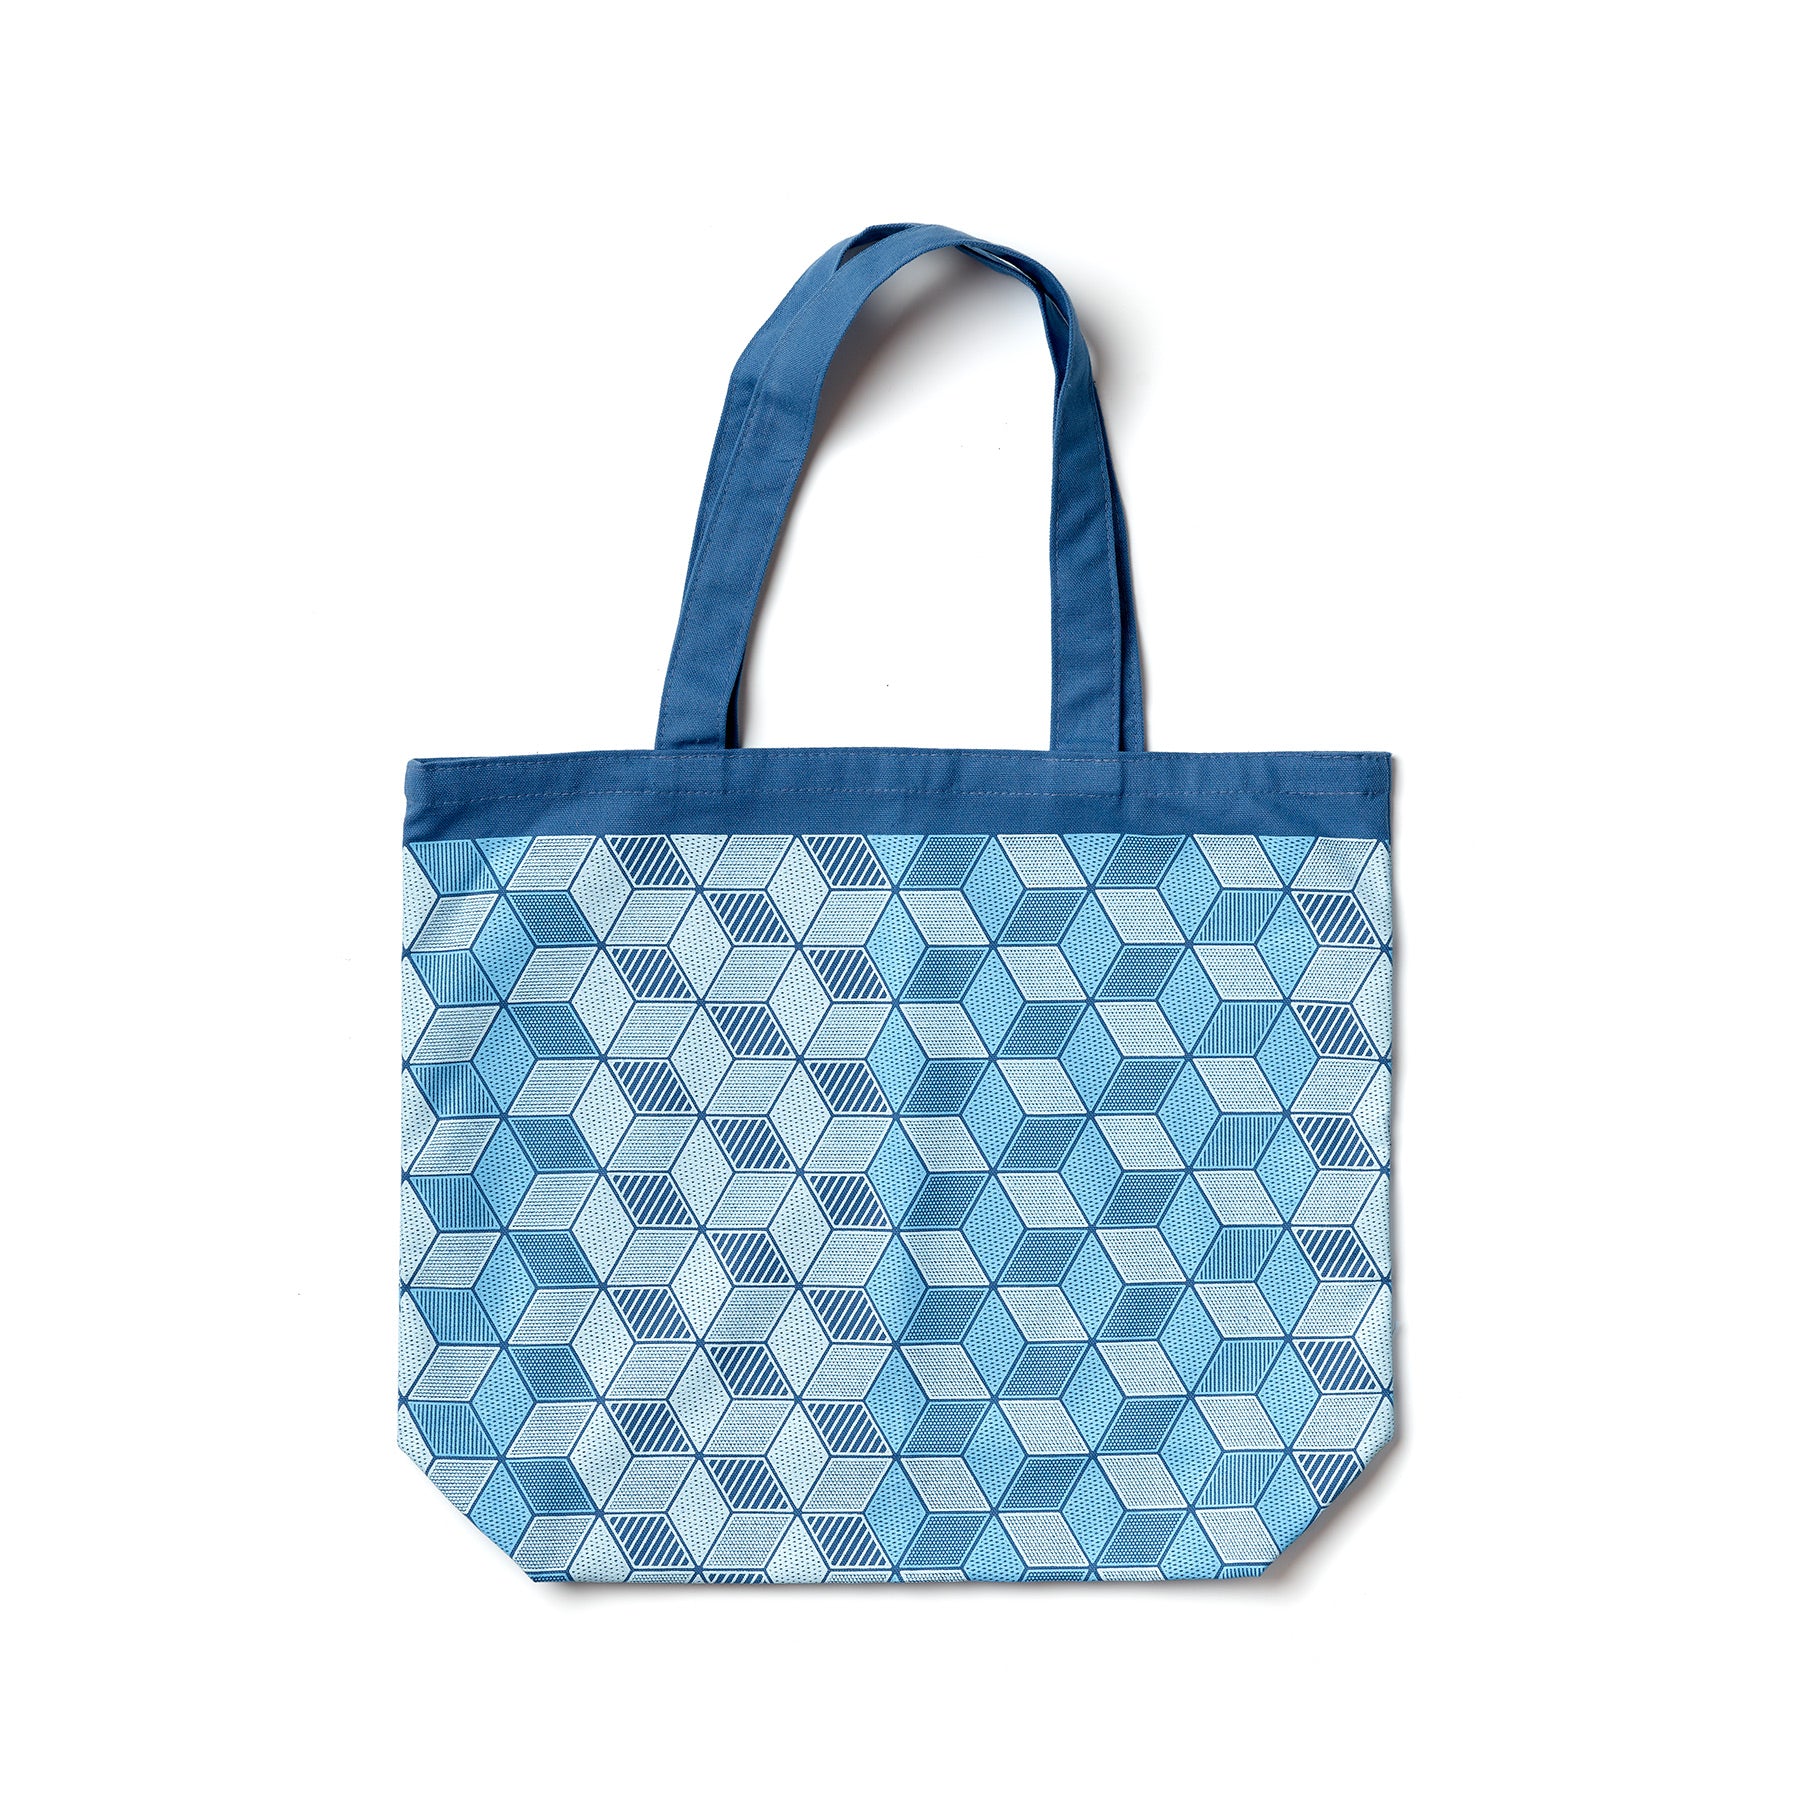 Mural Tote in Bright Blue Zoom Image 1